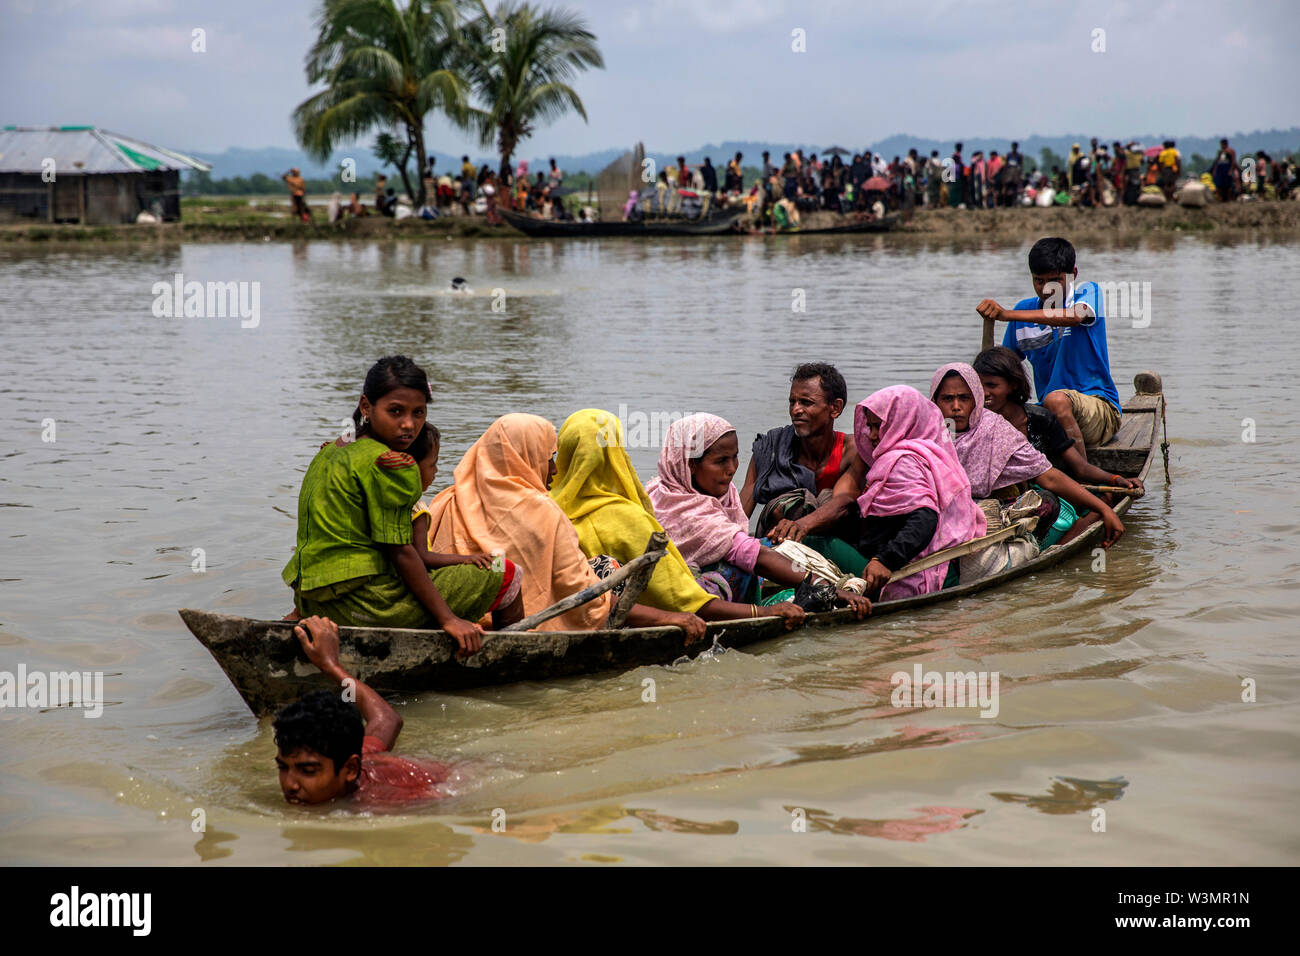 Over the past few days, more than 300,000 Rohingya Muslims have fled Burma’s Rakhine state for Bangladesh, climbing over hills and boarding boats to safety. Stock Photo